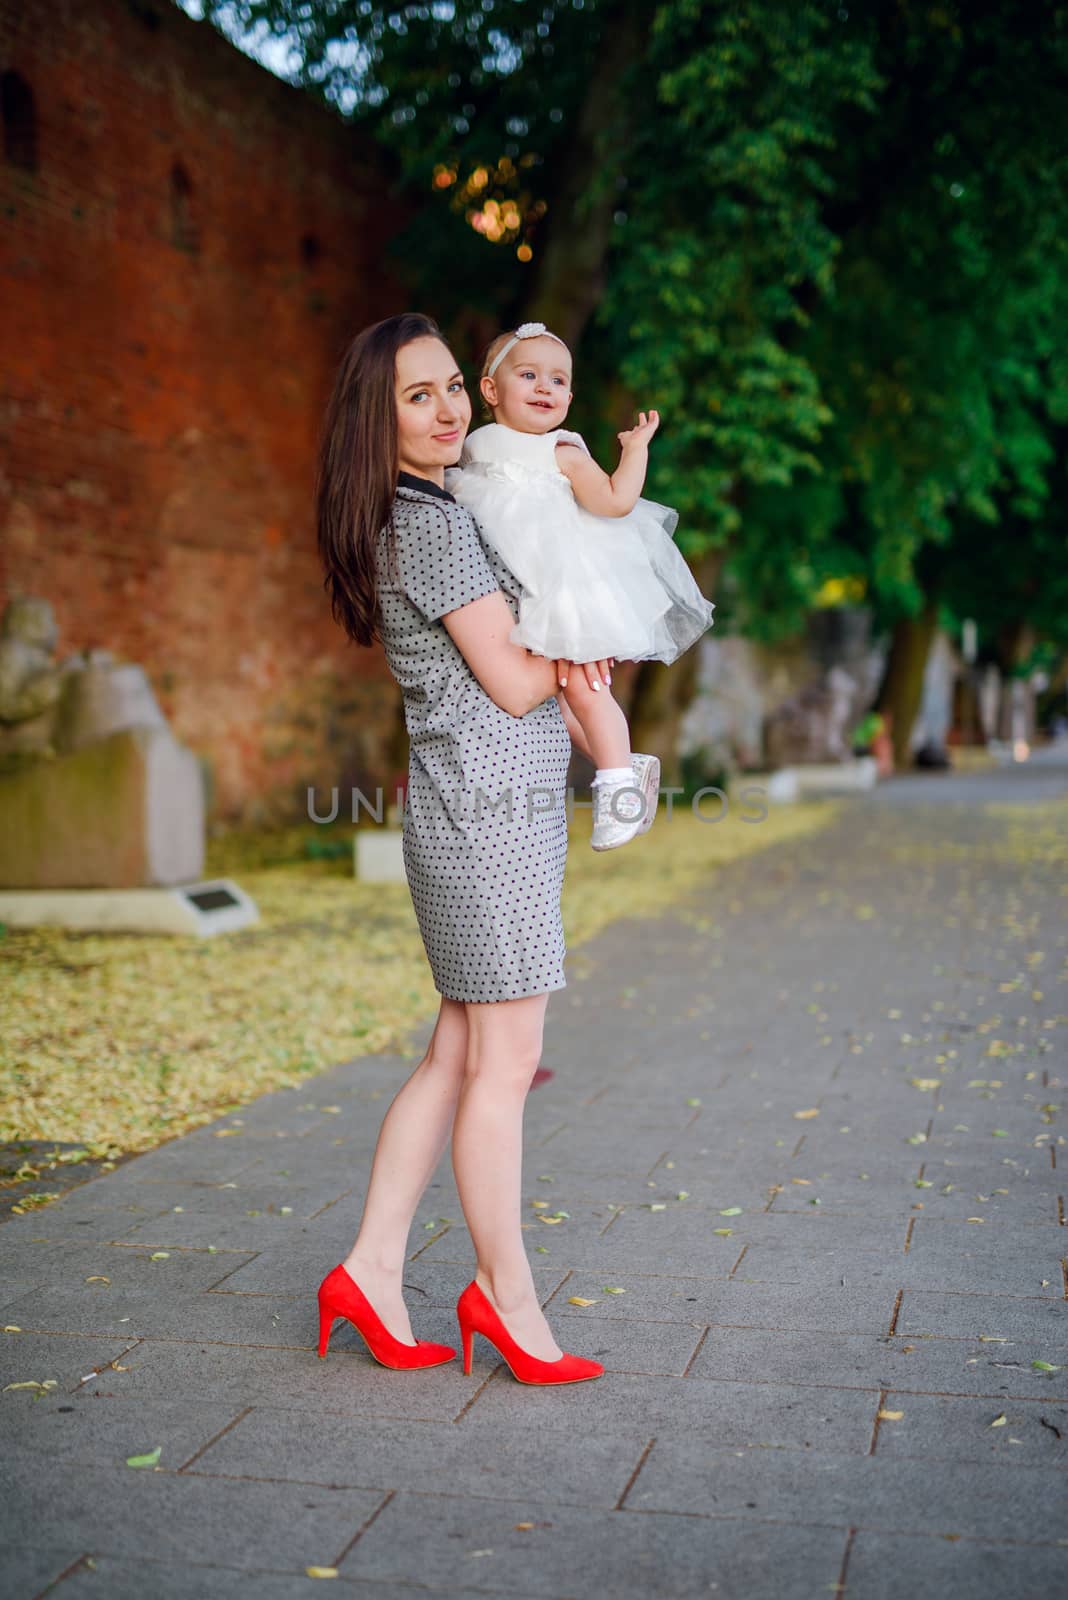 Happy mother and daughter in the park. Beauty nature scene with family outdoor lifestyle. Happy family resting together on the green grass, having fun outdoor. Happiness and harmony in family life.